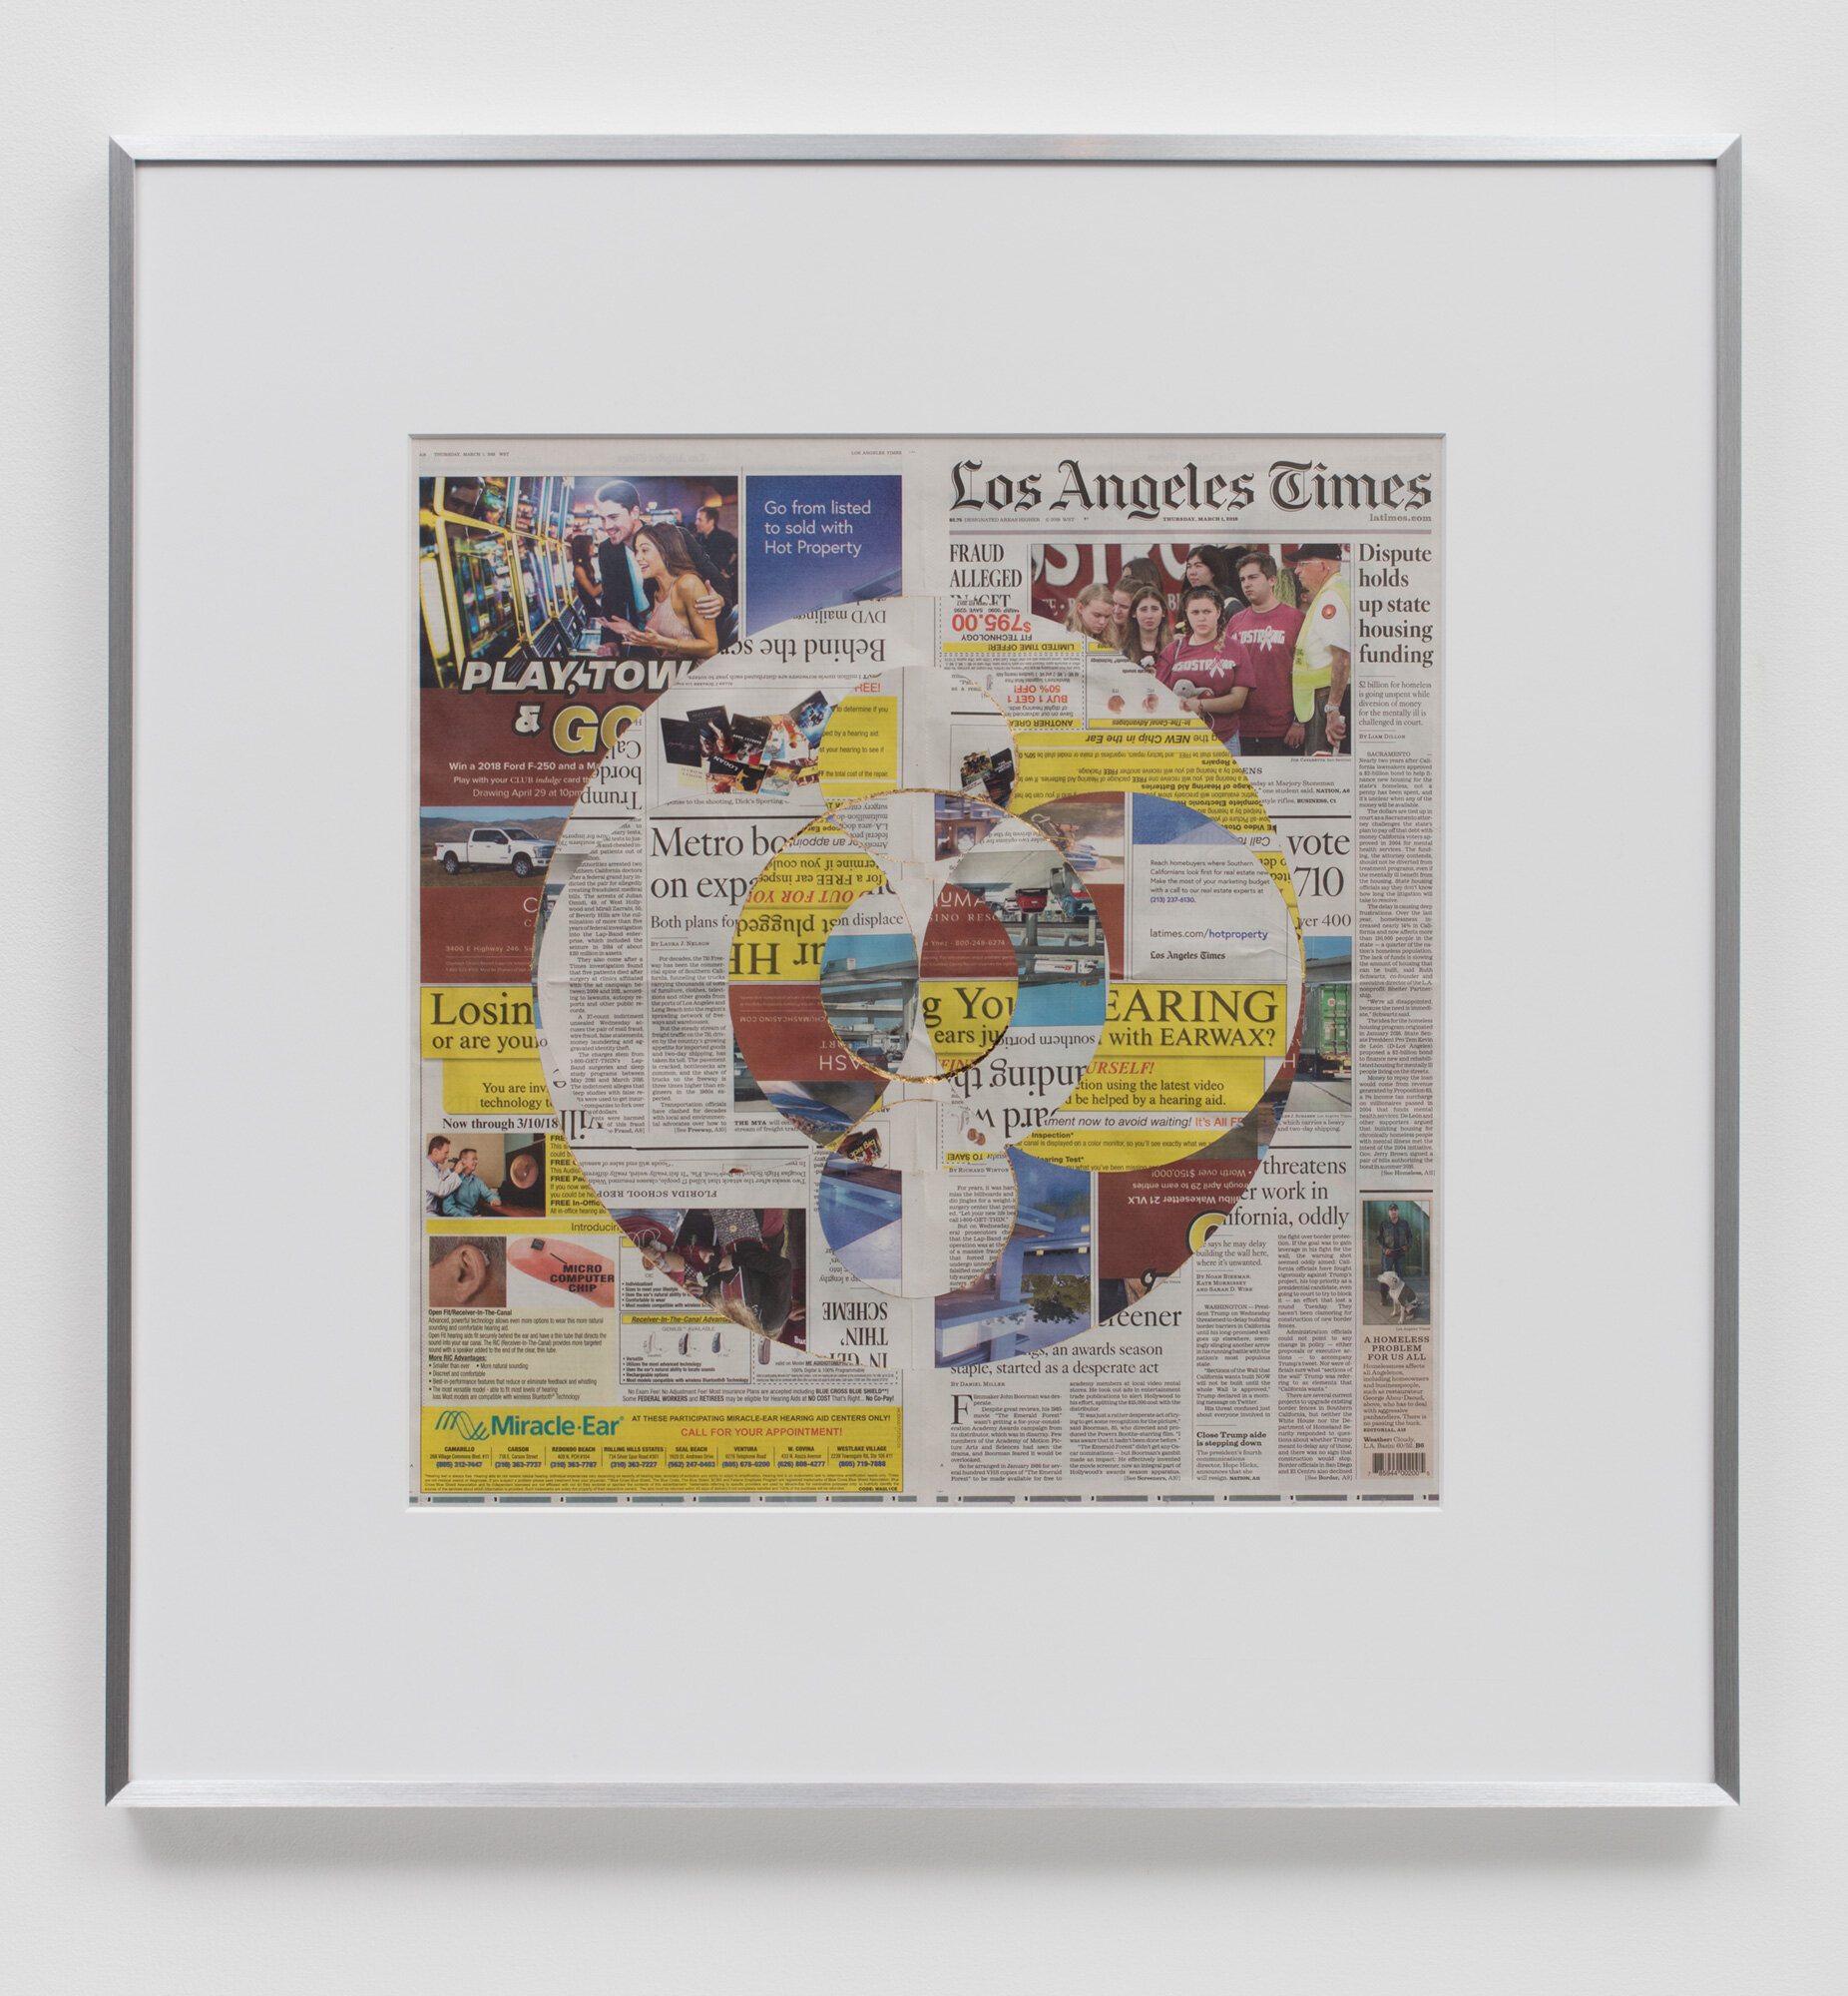   Blind Collage (Three 180° Rotations, Los Angeles Times, Thursday, March 1, 2018)    2018   Newspaper, tape, and 22 karat gold leaf  34 1/2 x 33 3/4 inches  Exhibition:  Equivalents, 2018    